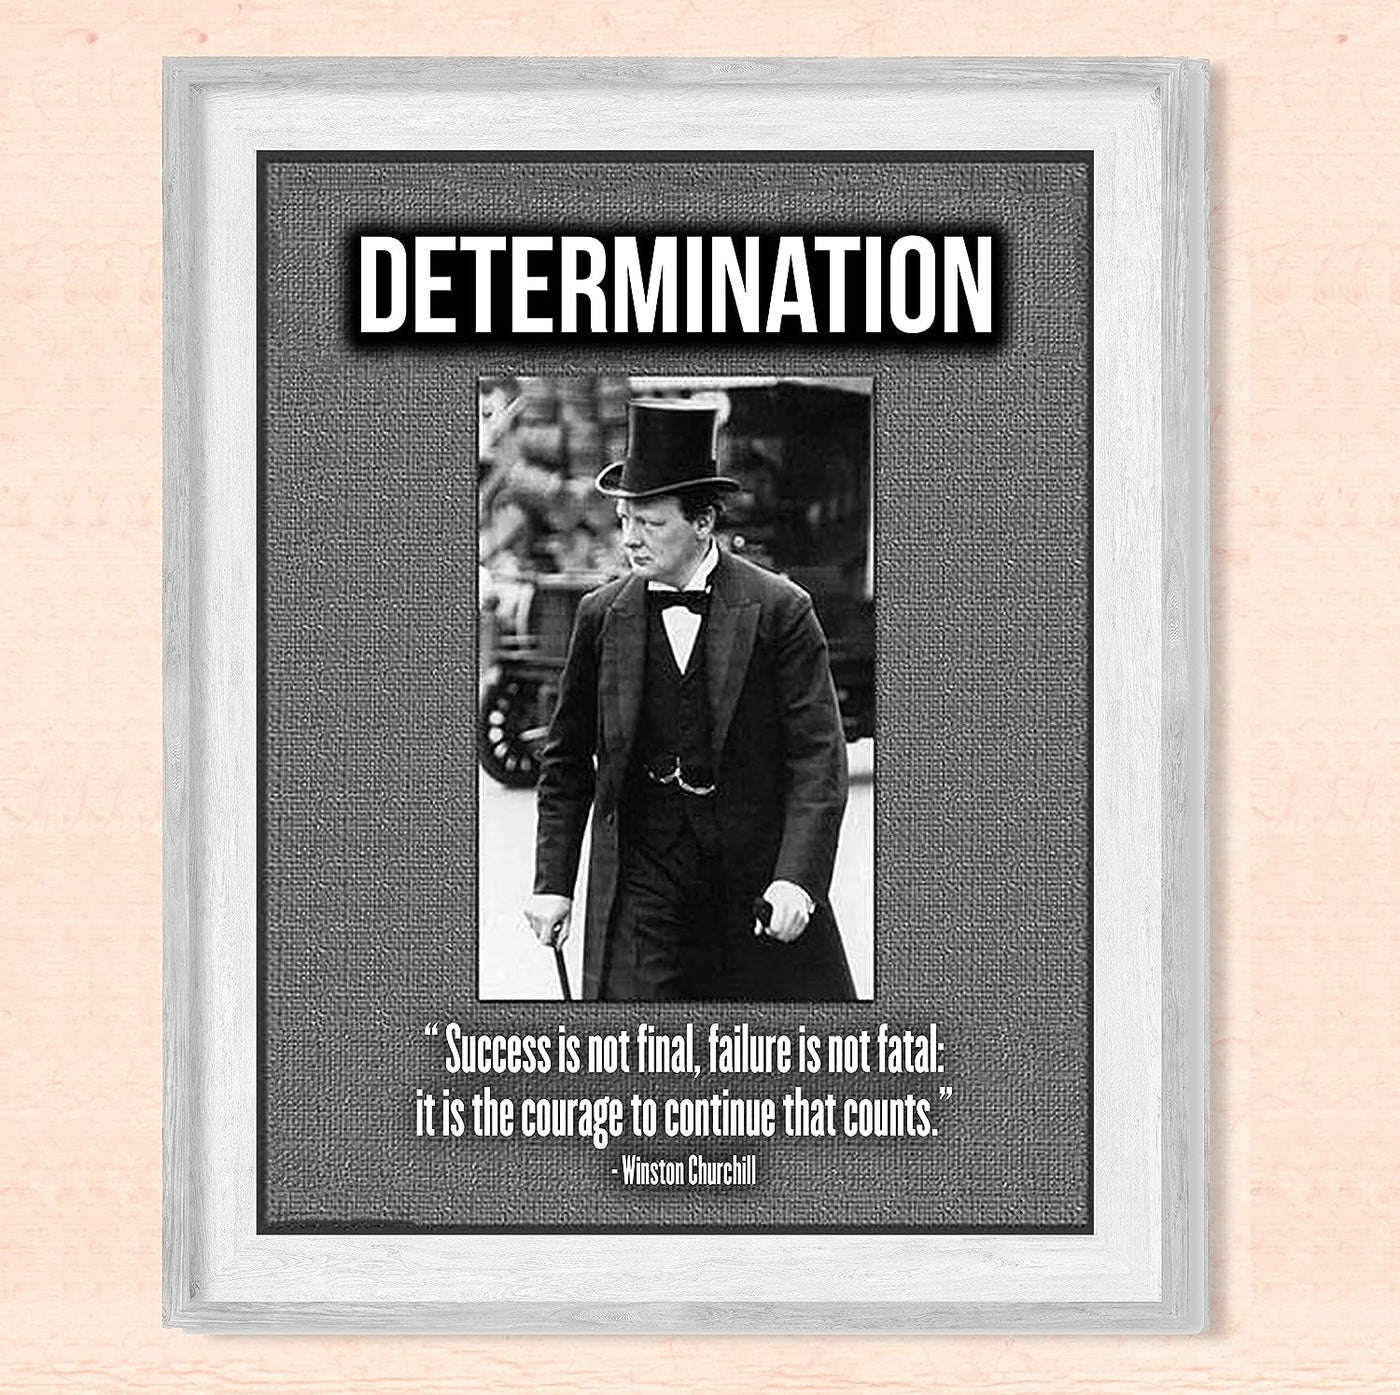 Winston Churchill Quotes-"Determination-Courage to Continue That Counts"-8 x 10" Motivational Portrait Wall Art Print-Ready to Frame. Retro Home-Office-Library Decor. Great Inspirational Gift!